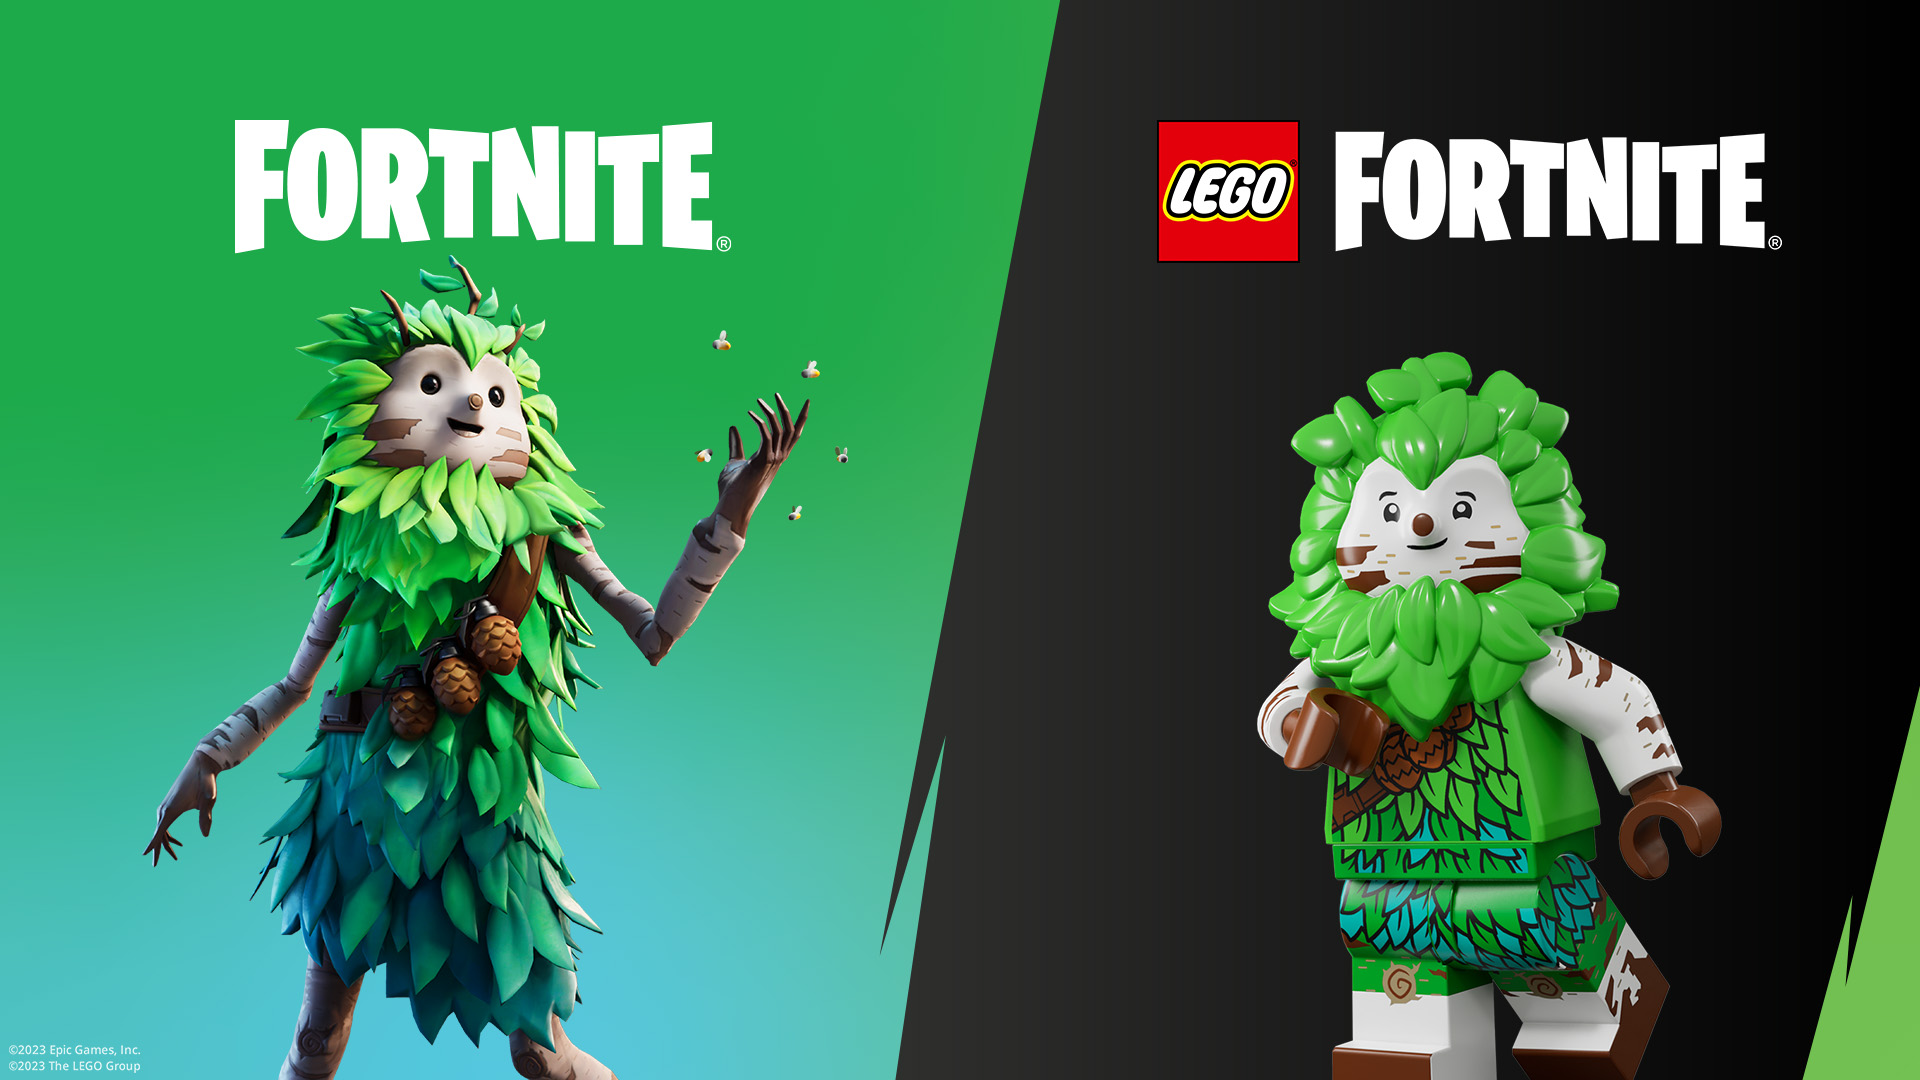 Fortnite is adding a Lego-themed survival crafting mode that includes Lego versions of over 1200 pre-existing skins